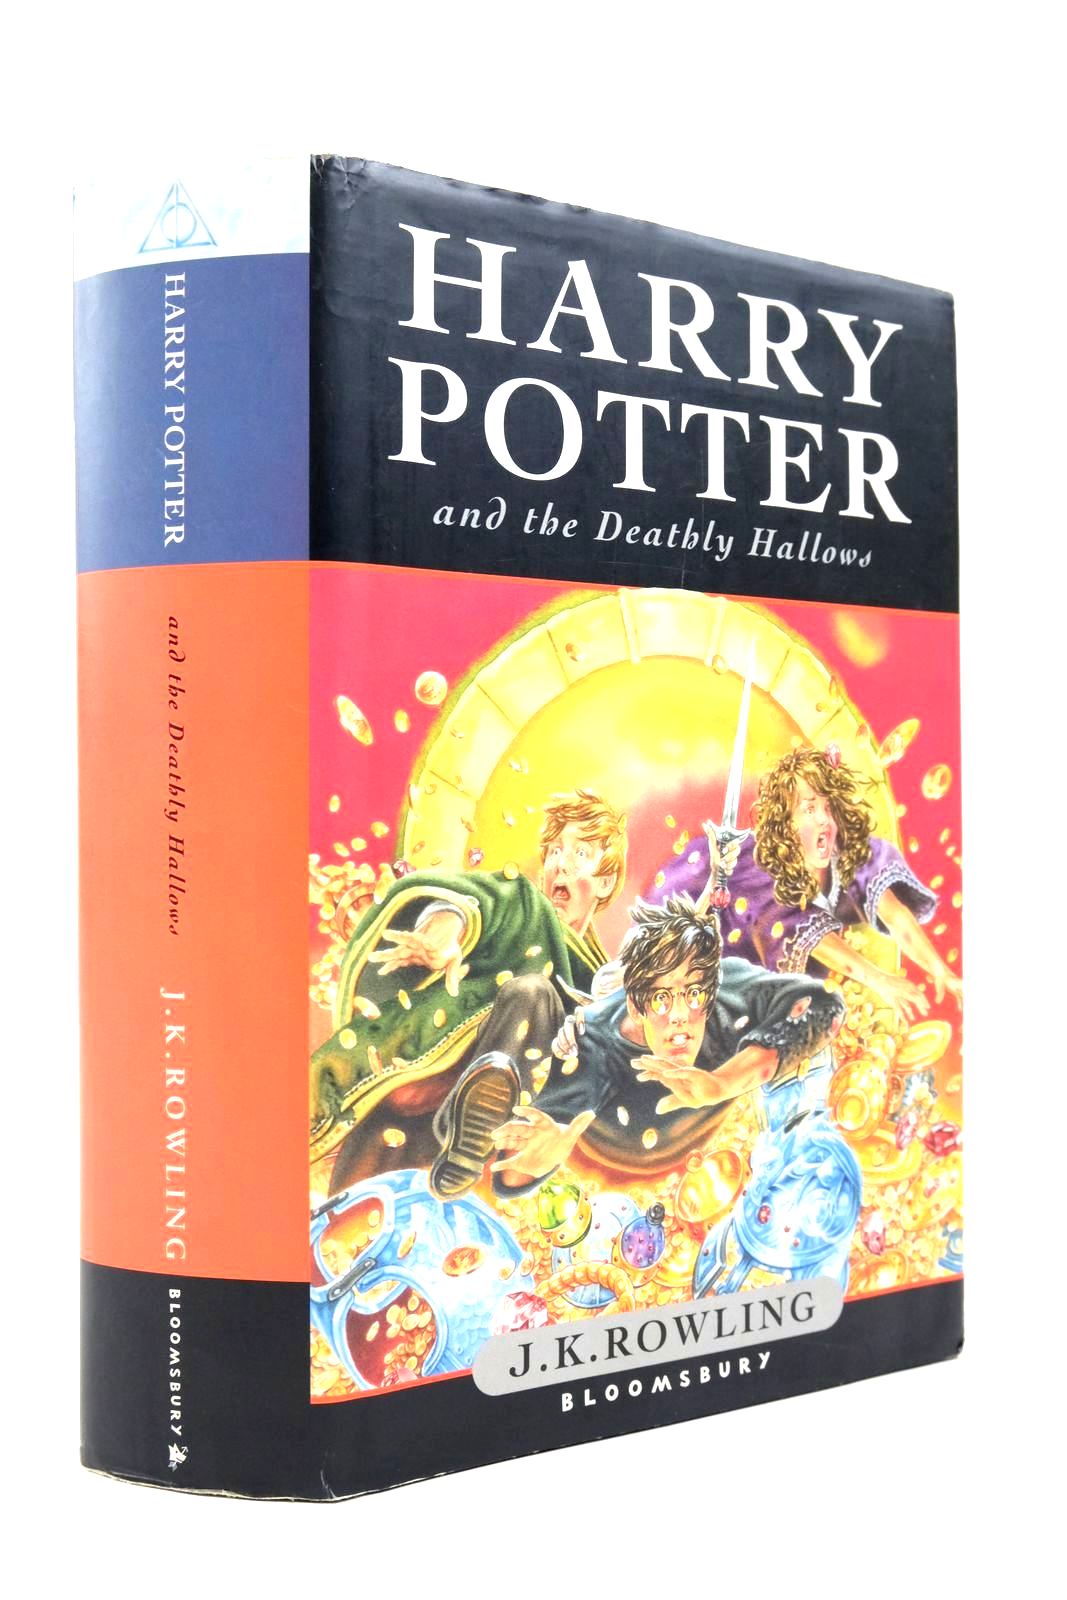 Photo of HARRY POTTER AND THE DEATHLY HALLOWS written by Rowling, J.K. published by Bloomsbury (STOCK CODE: 2139285)  for sale by Stella & Rose's Books